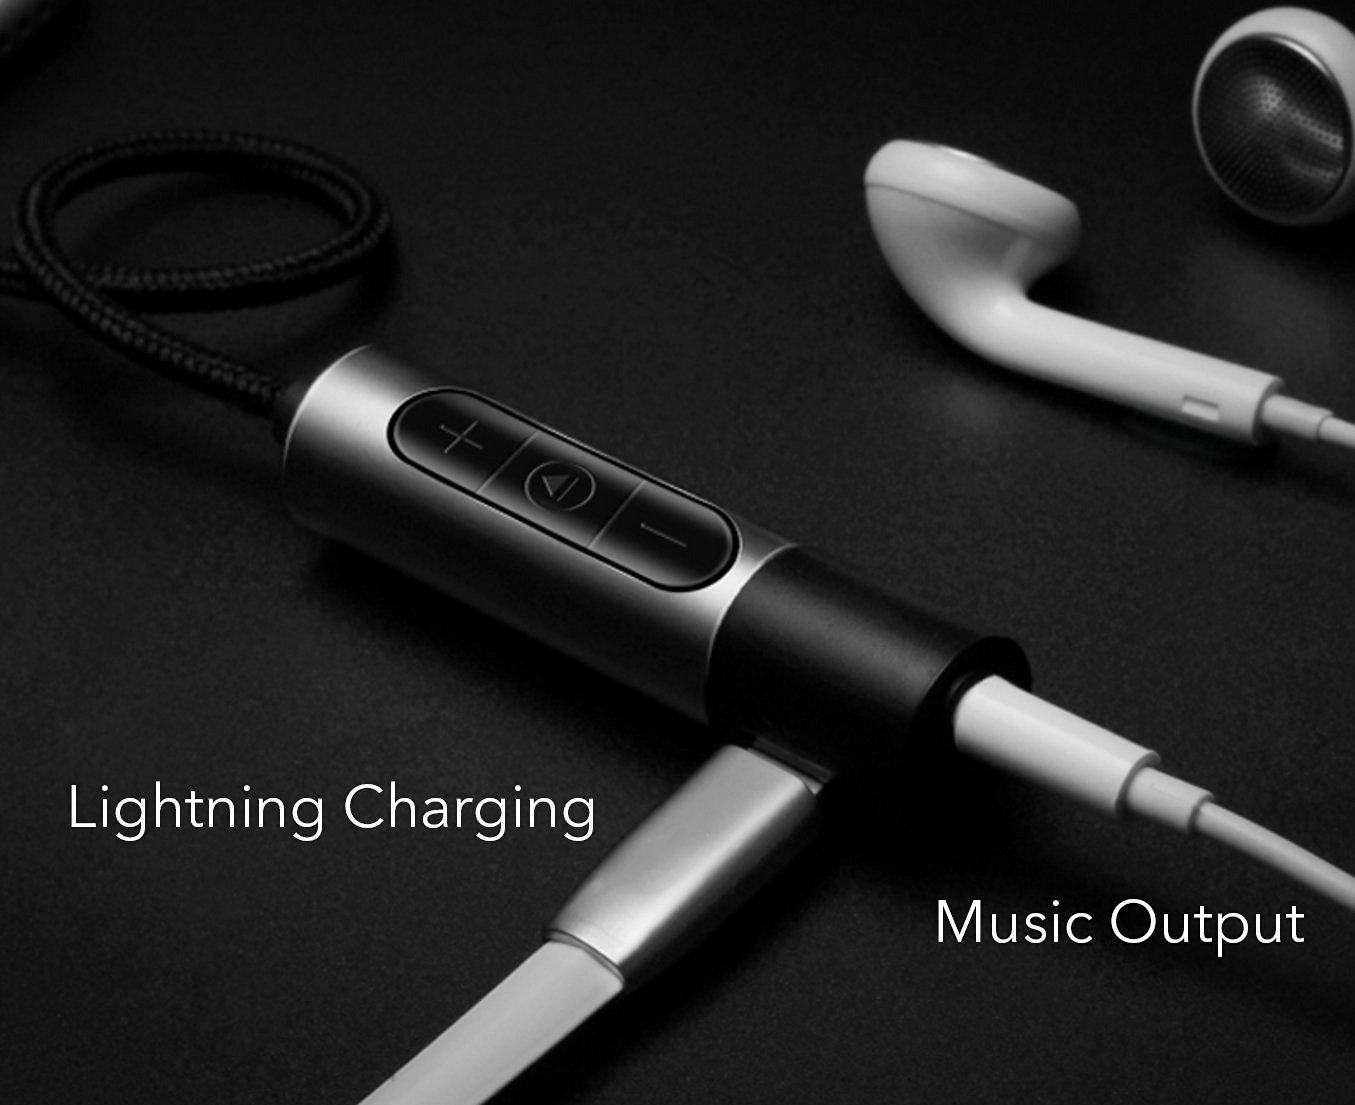 iphone 7 music charging adapter